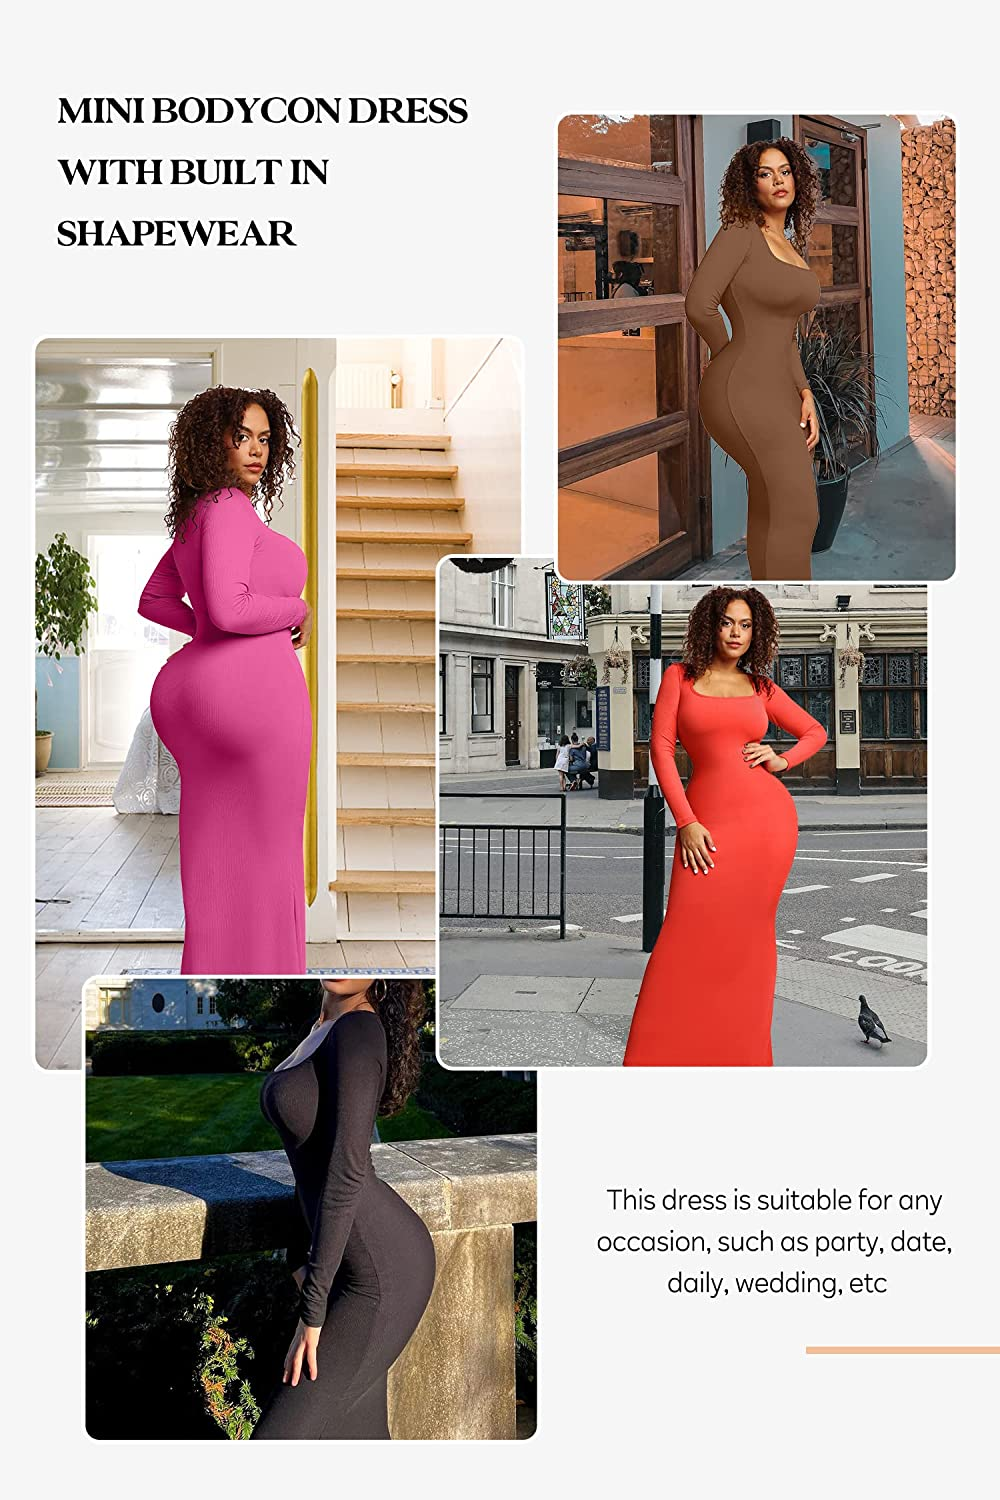 Cut Out ChIc Bodycon Dress Build In Shapewear